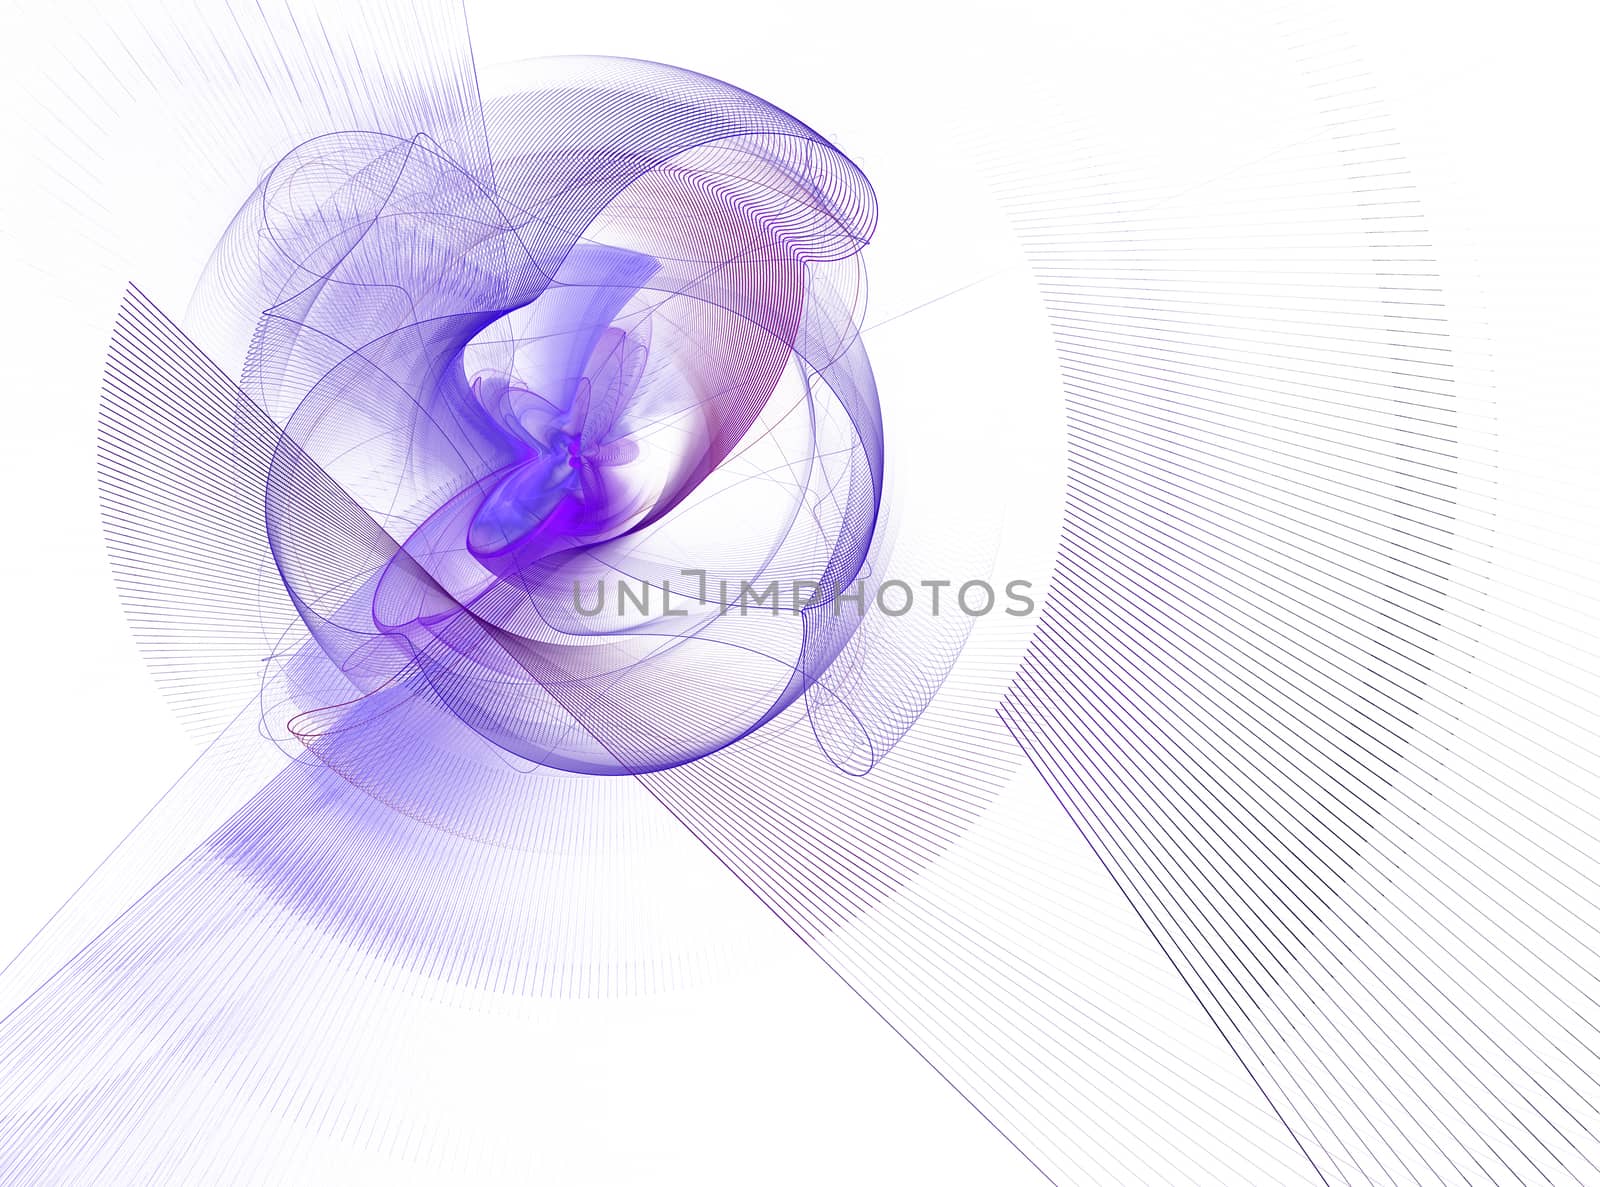 An abstract computer generated modern fractal design on dark background. Abstract fractal color texture. Digital art. Abstract Form & Colors. Vortex and rotation pattern